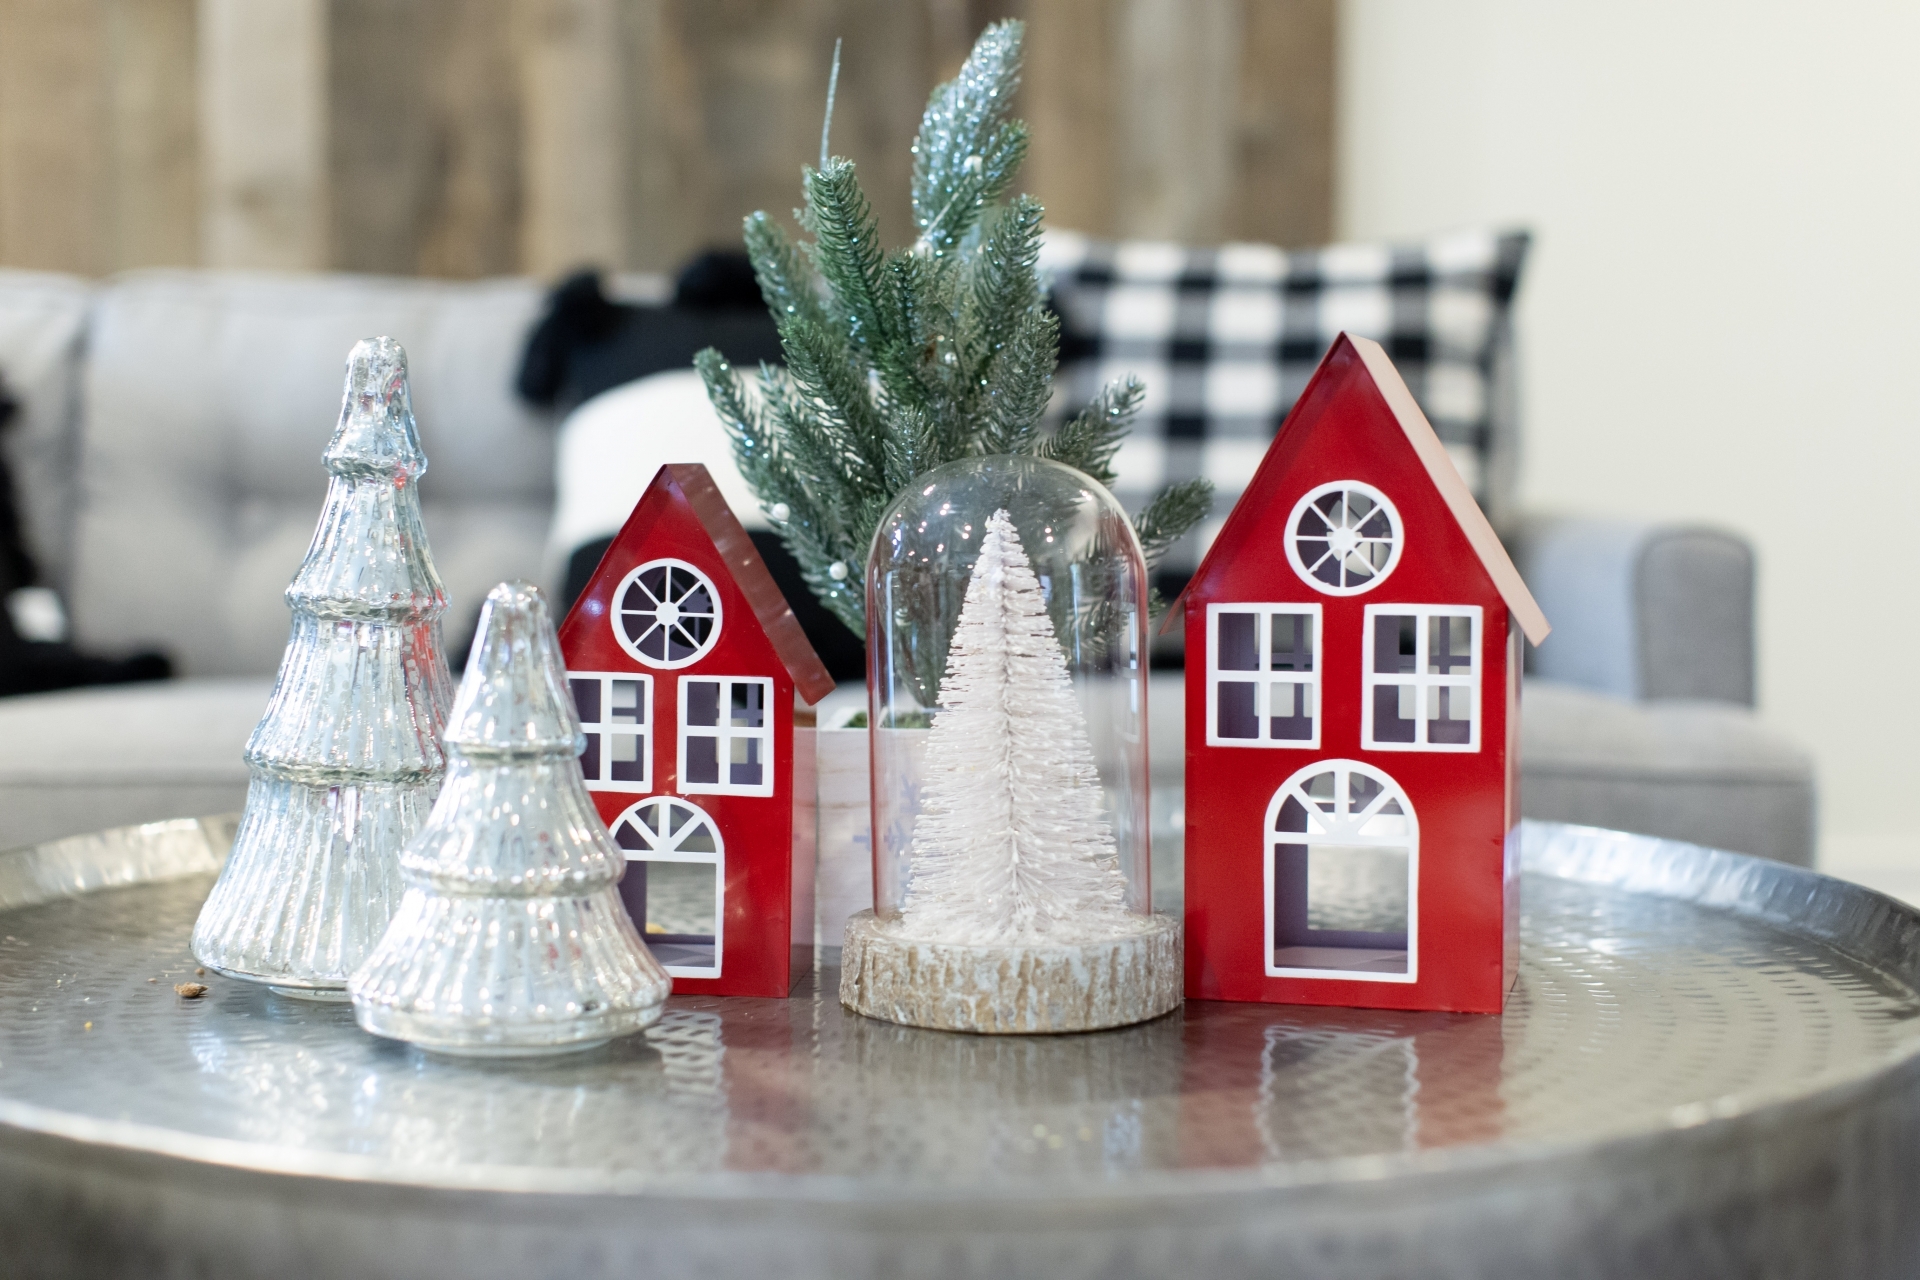 The Best Amazon Christmas Decorations For Your Home + Other Favorites From Target, Walmart, & Etsy by Life + Style Blogger, Heather Brown // My Life Well Loved